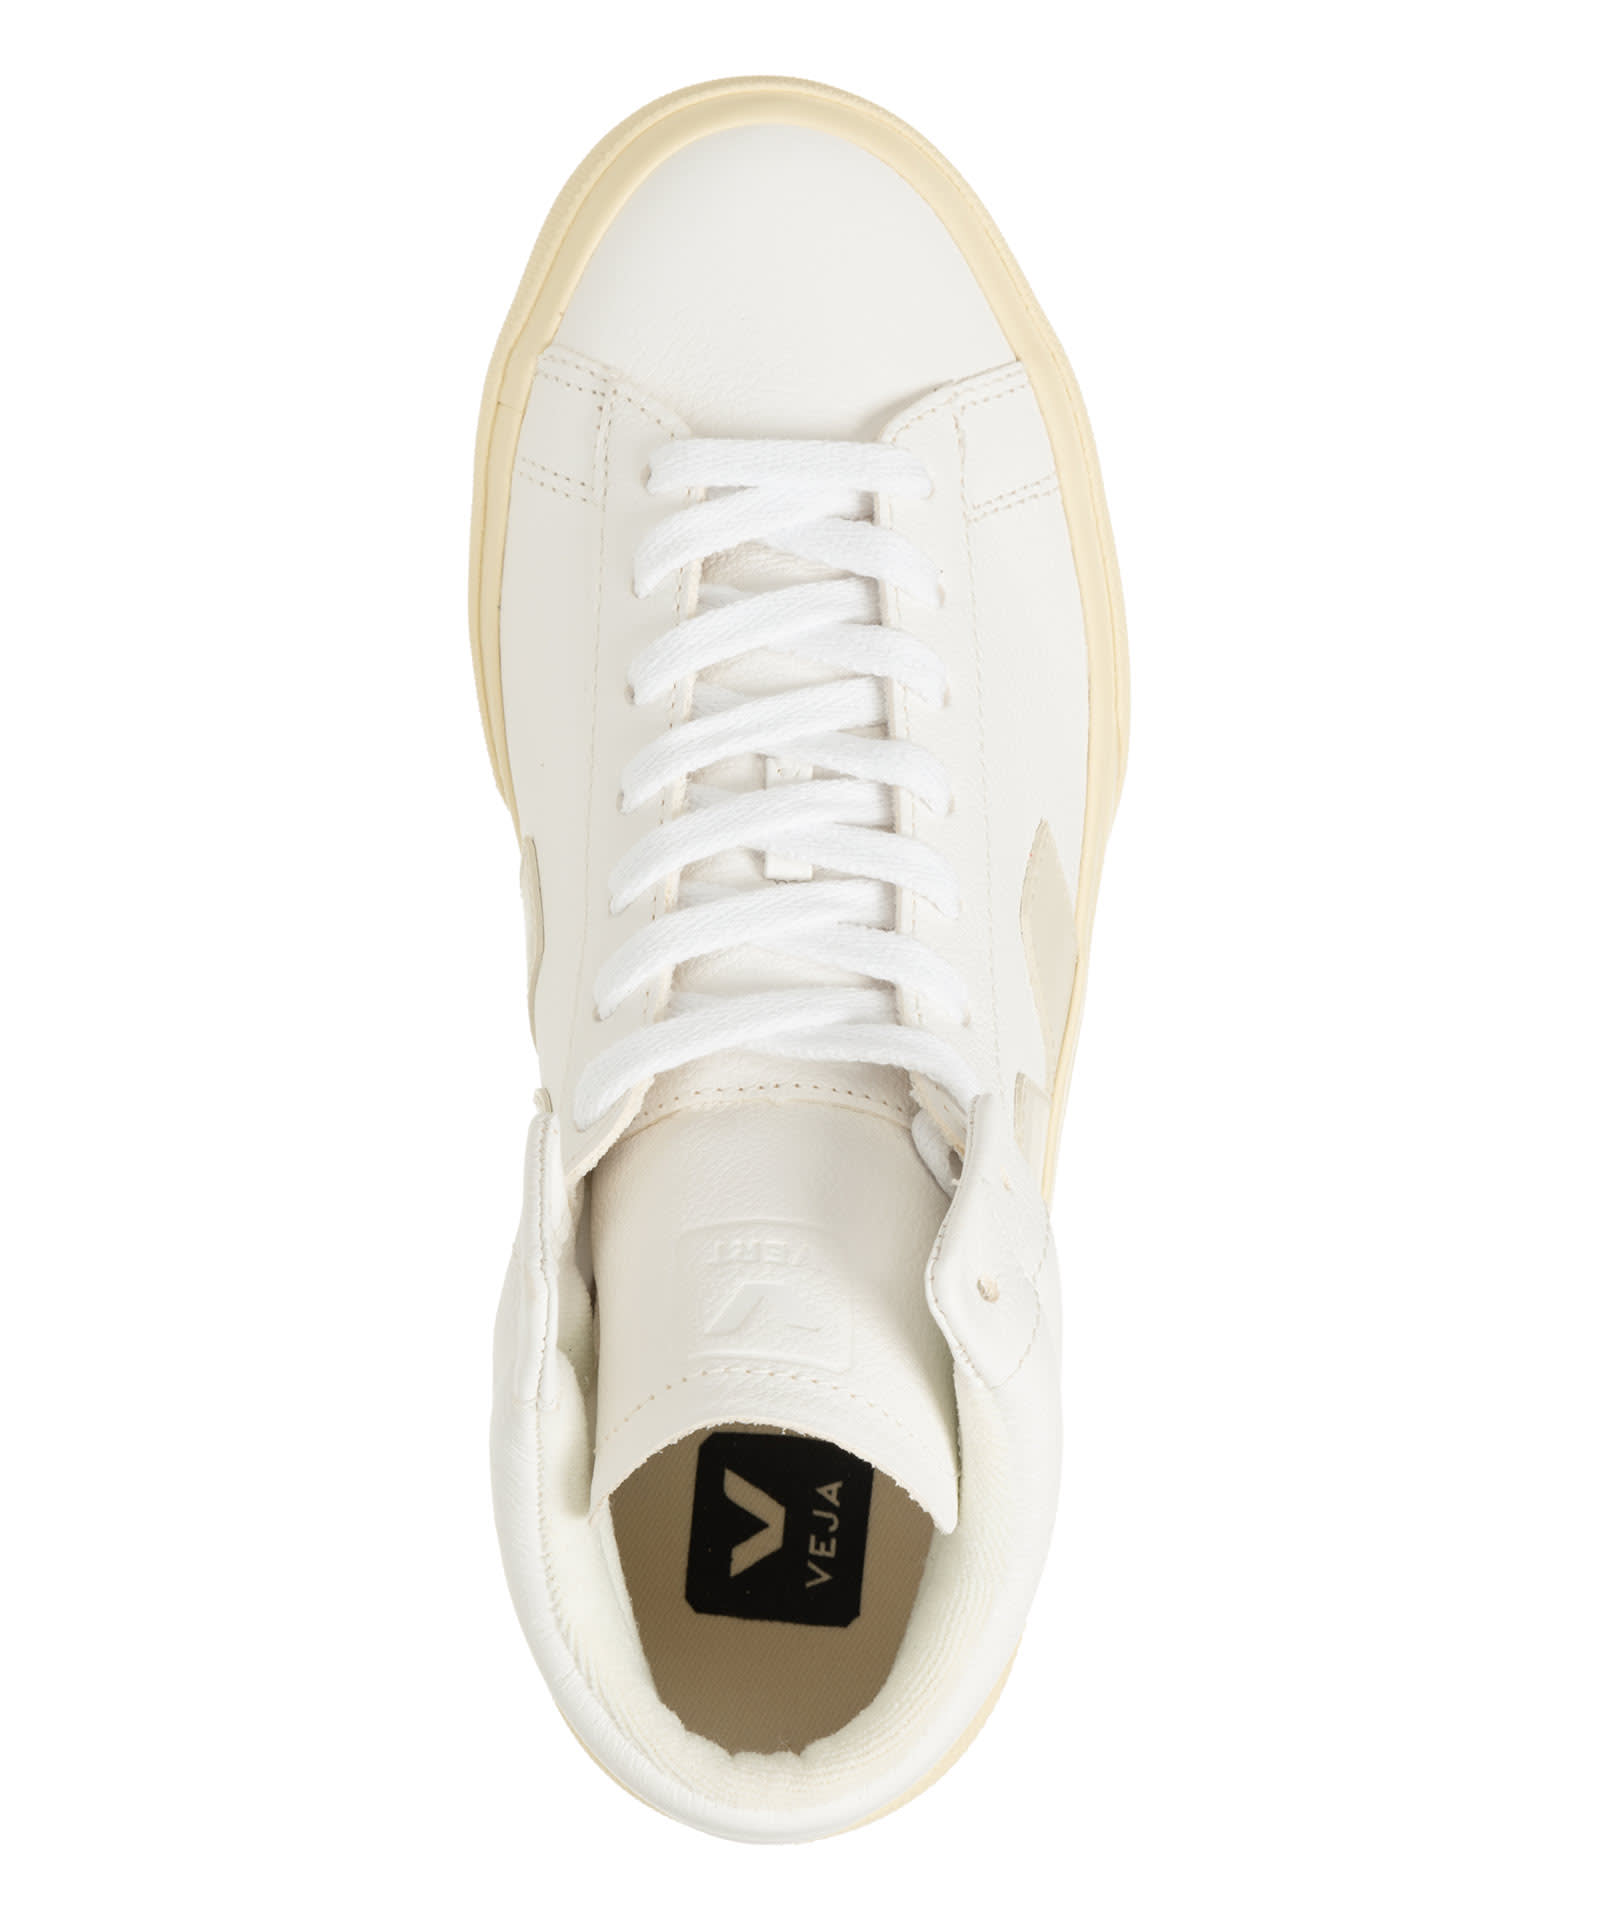 Shop Veja Minotaur Leather High-top Sneakers In White